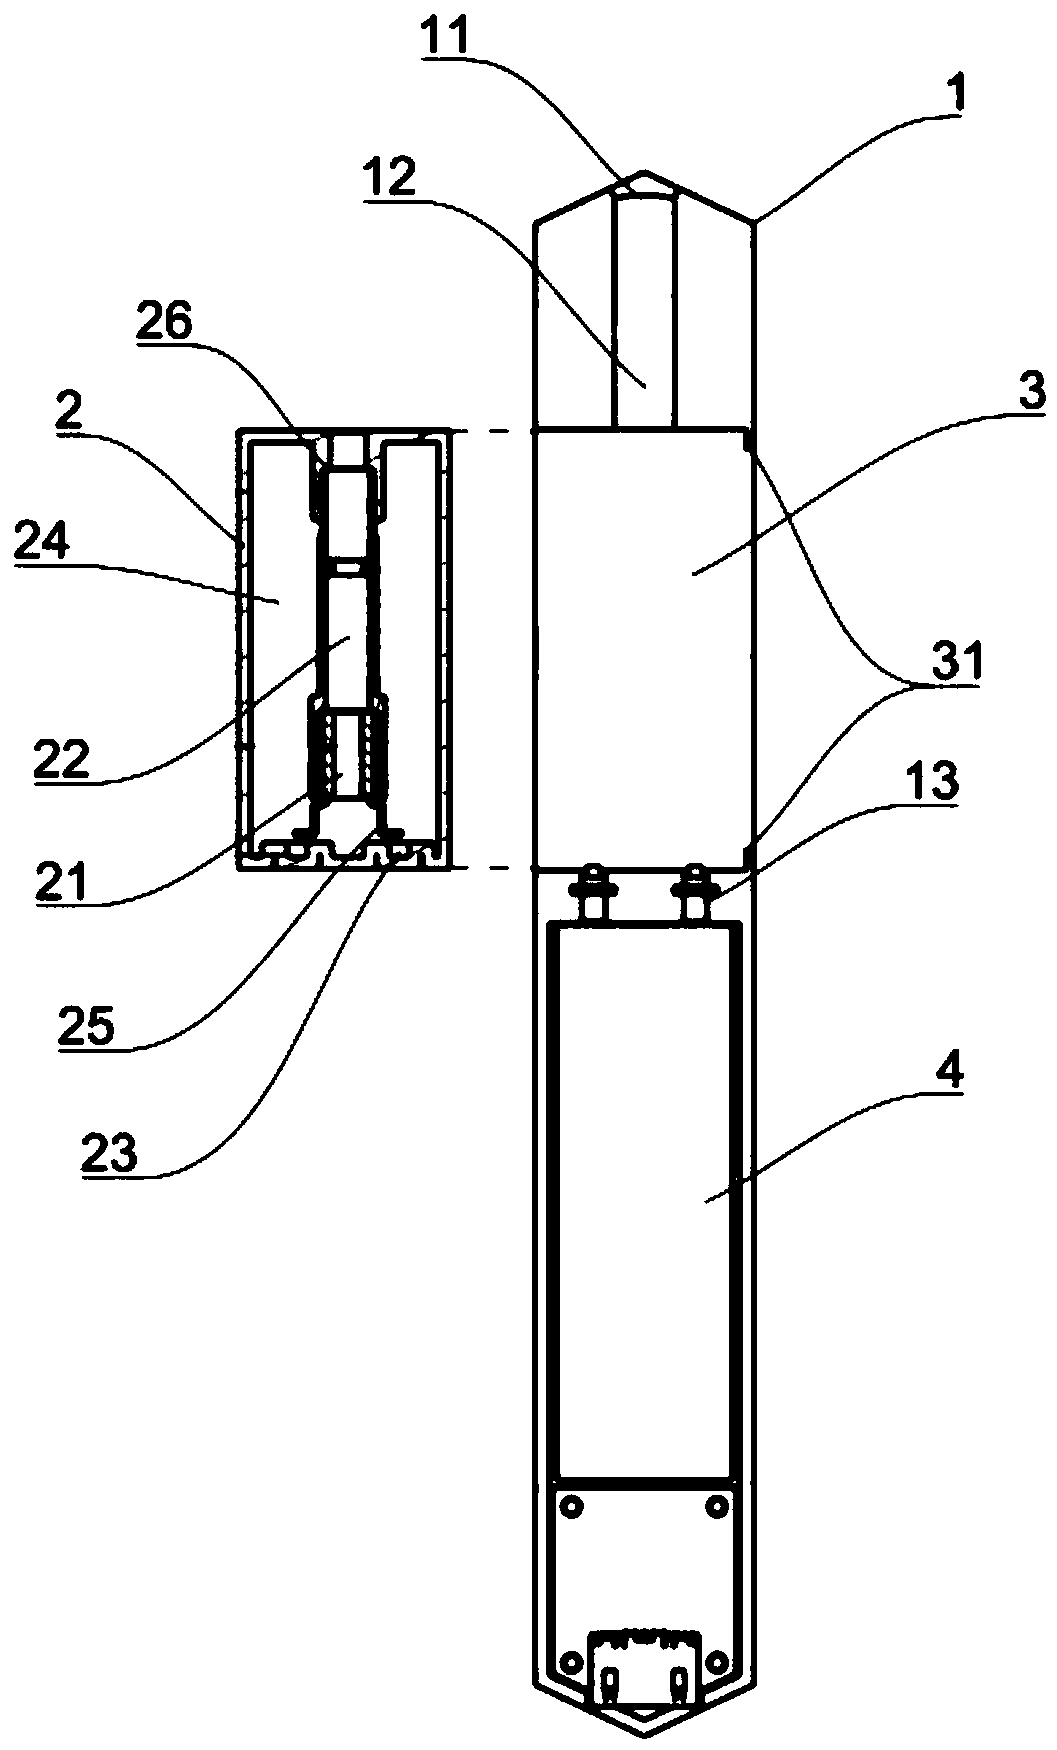 Electronic cigarette equipped with standardized cigarette cartridge